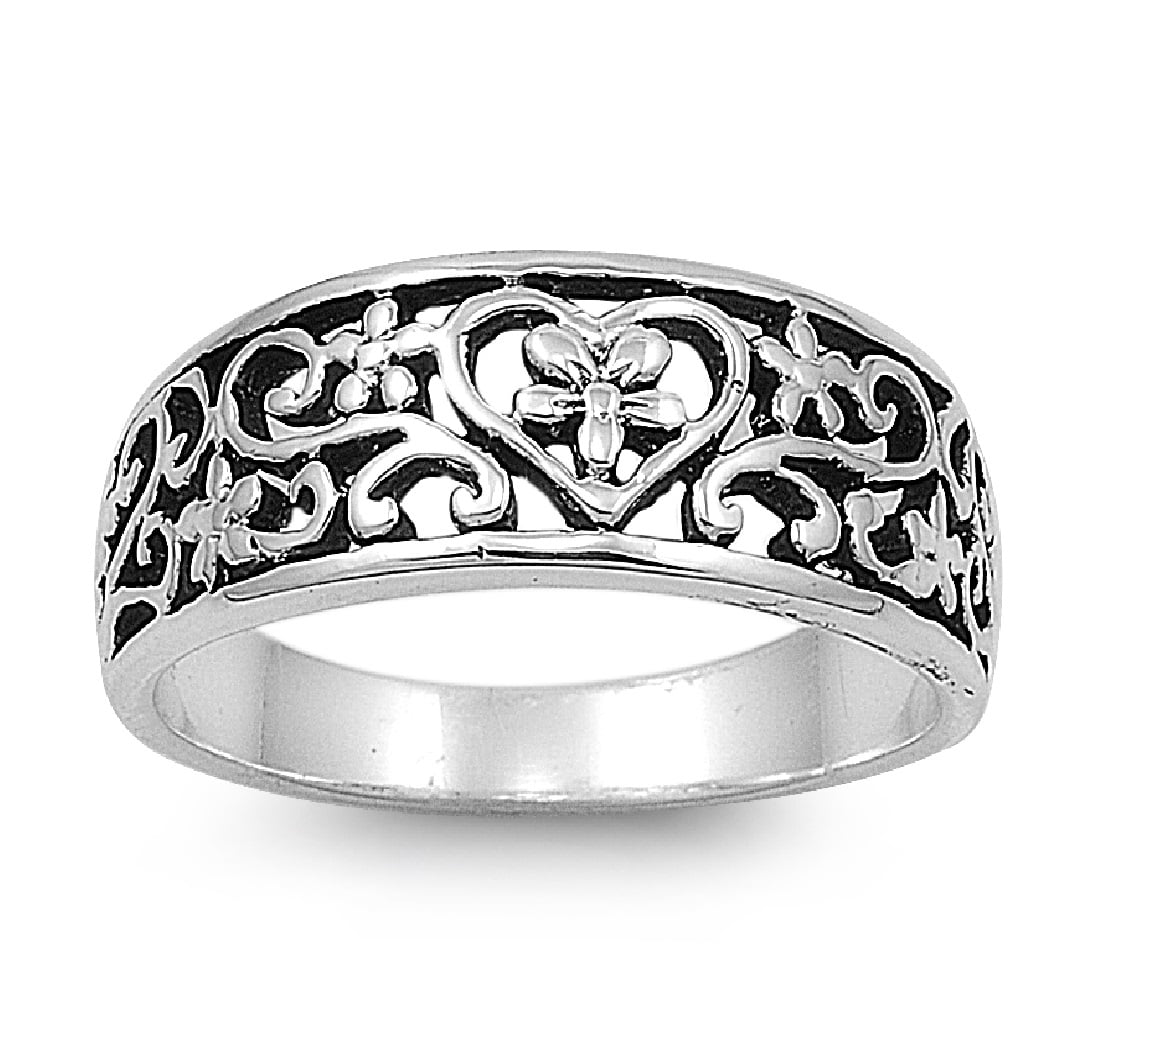 Filigree 925 Sterling Silver Ring Mothers Day Plain Fine Artisan Jewelry Gifts